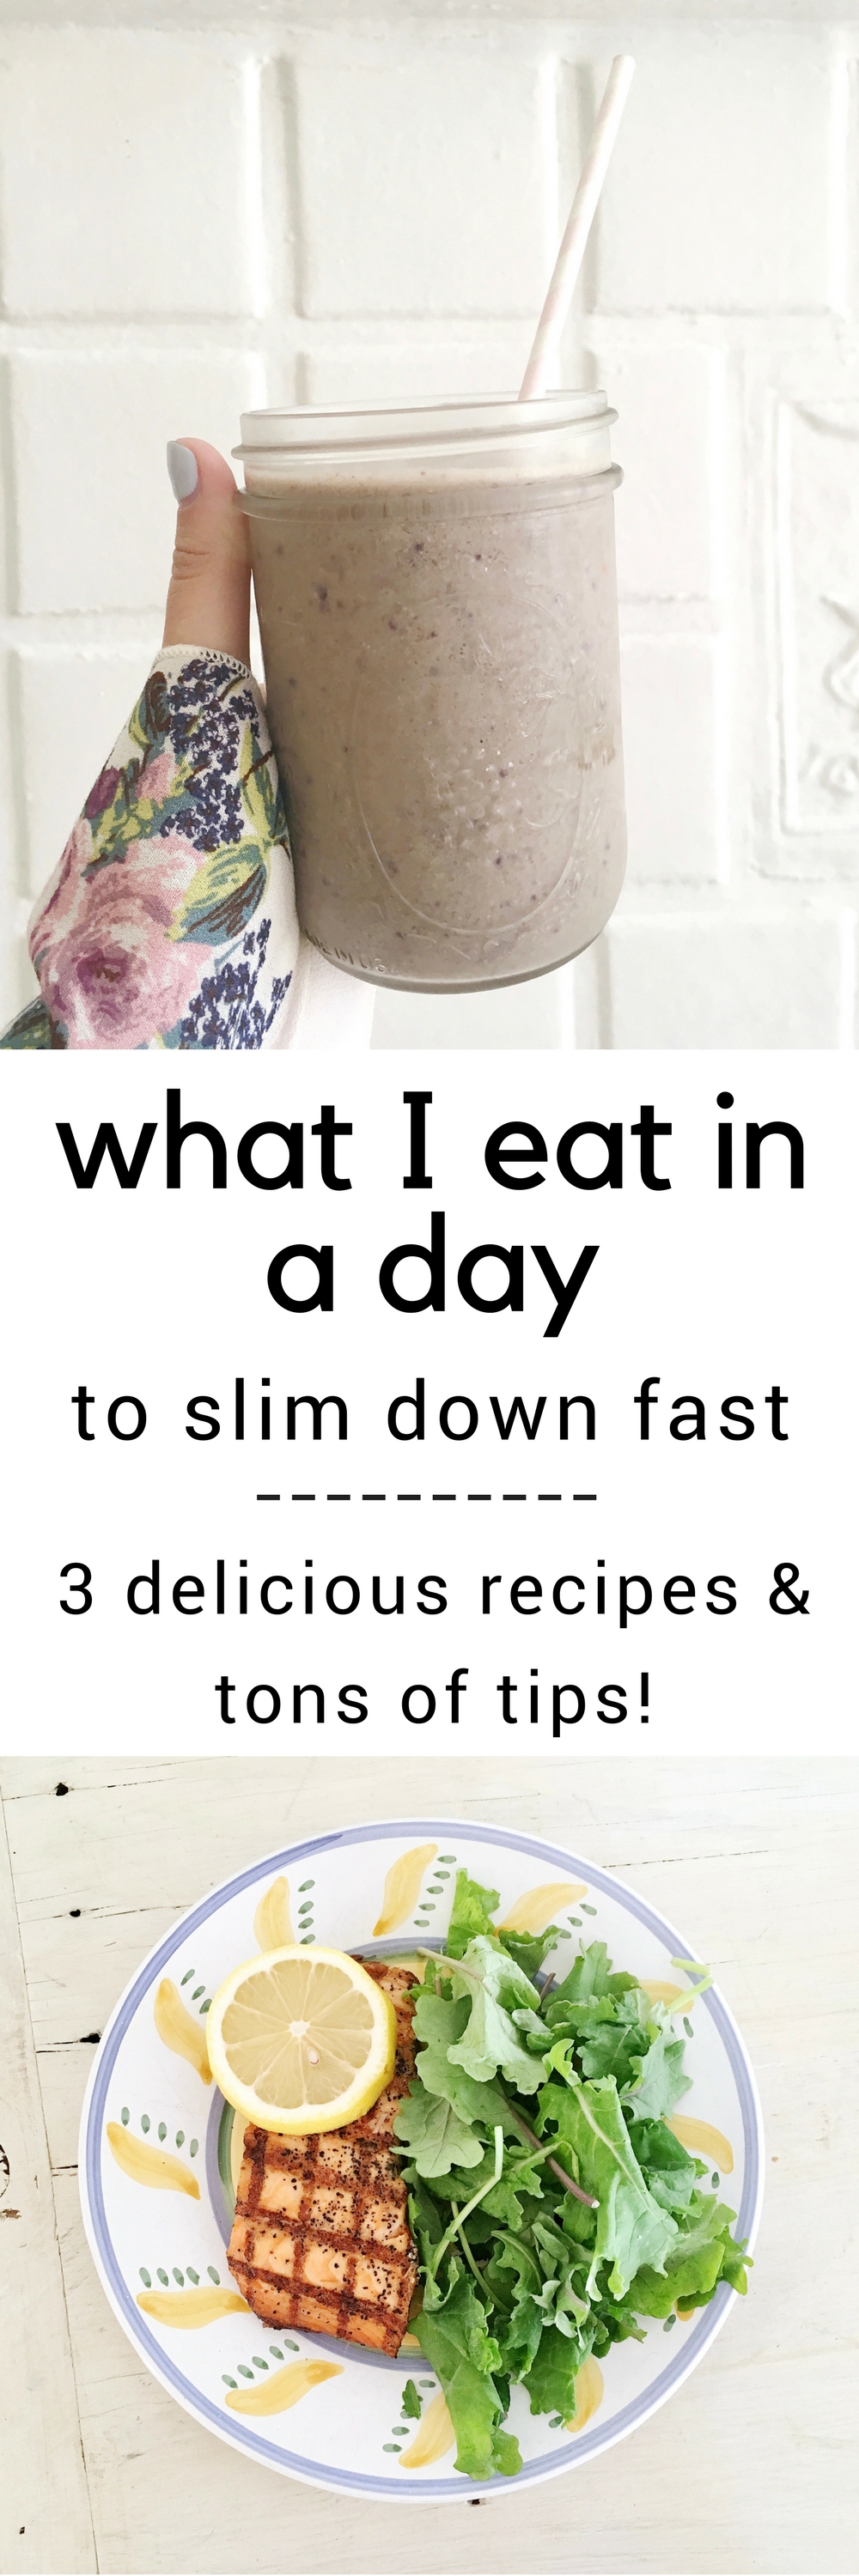 what I eat in a day